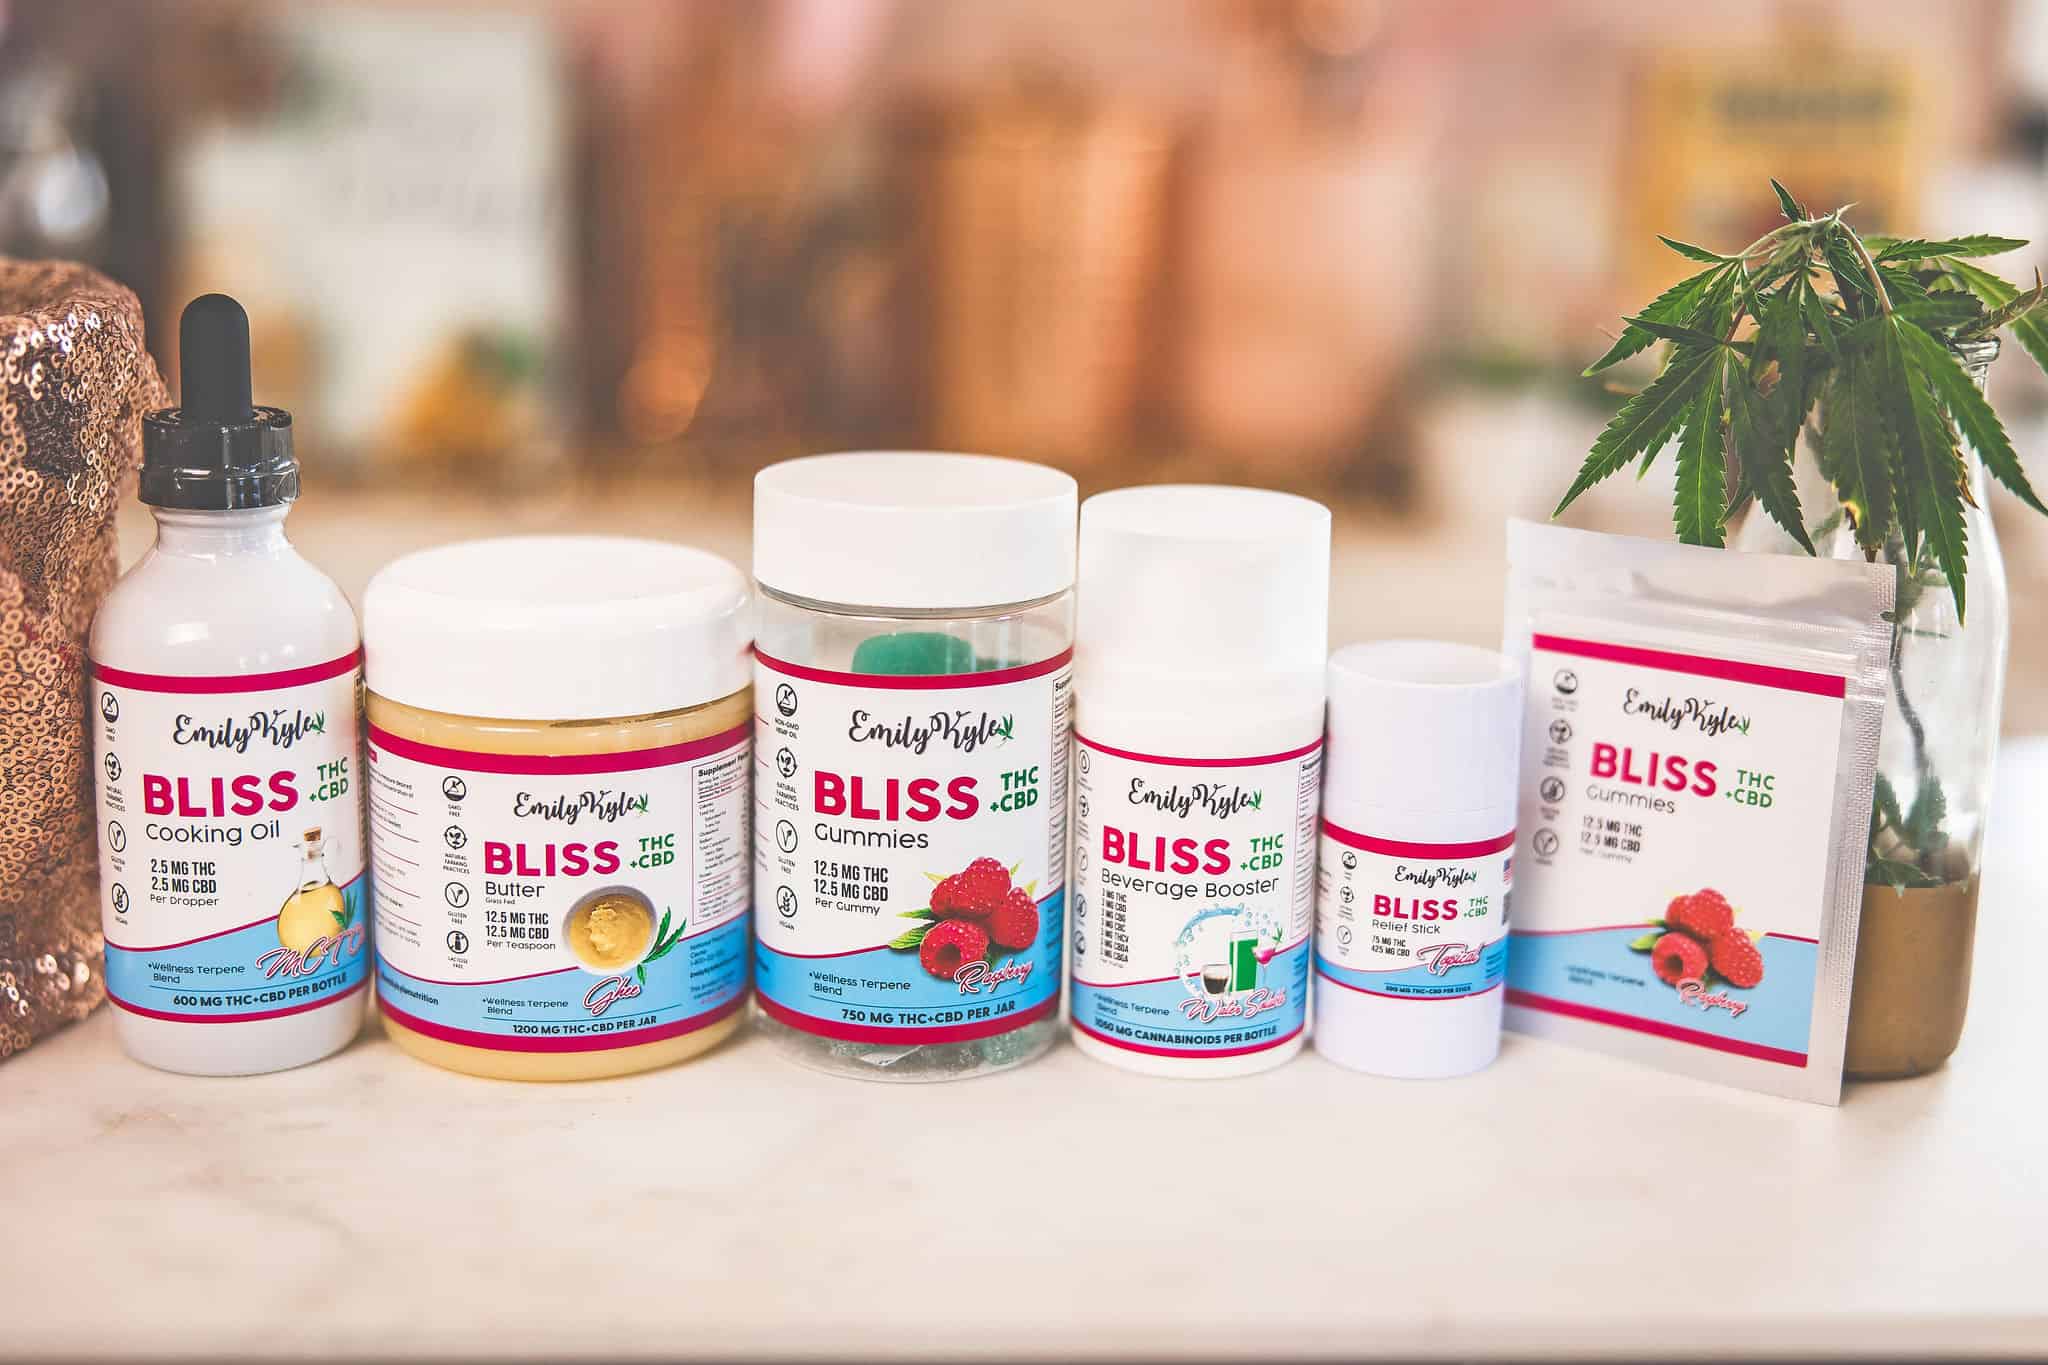 A picture of Emily Kyles Bliss Products.